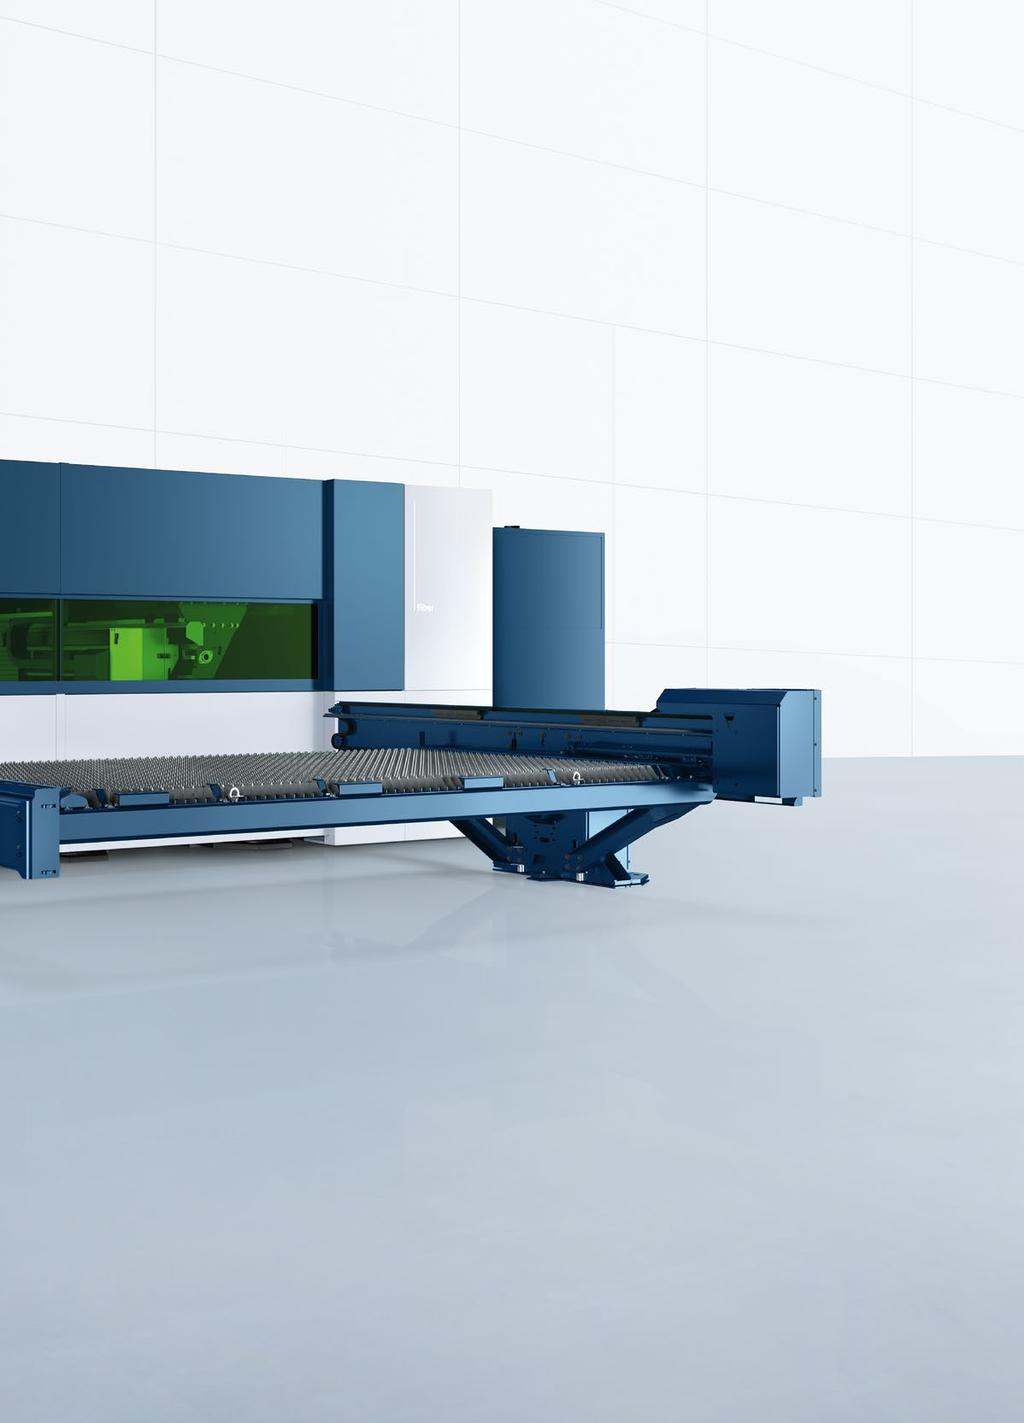 Series 2000 Products 17 The compact Series 2000 laser cutting machines combine minimum space requirements and ease of